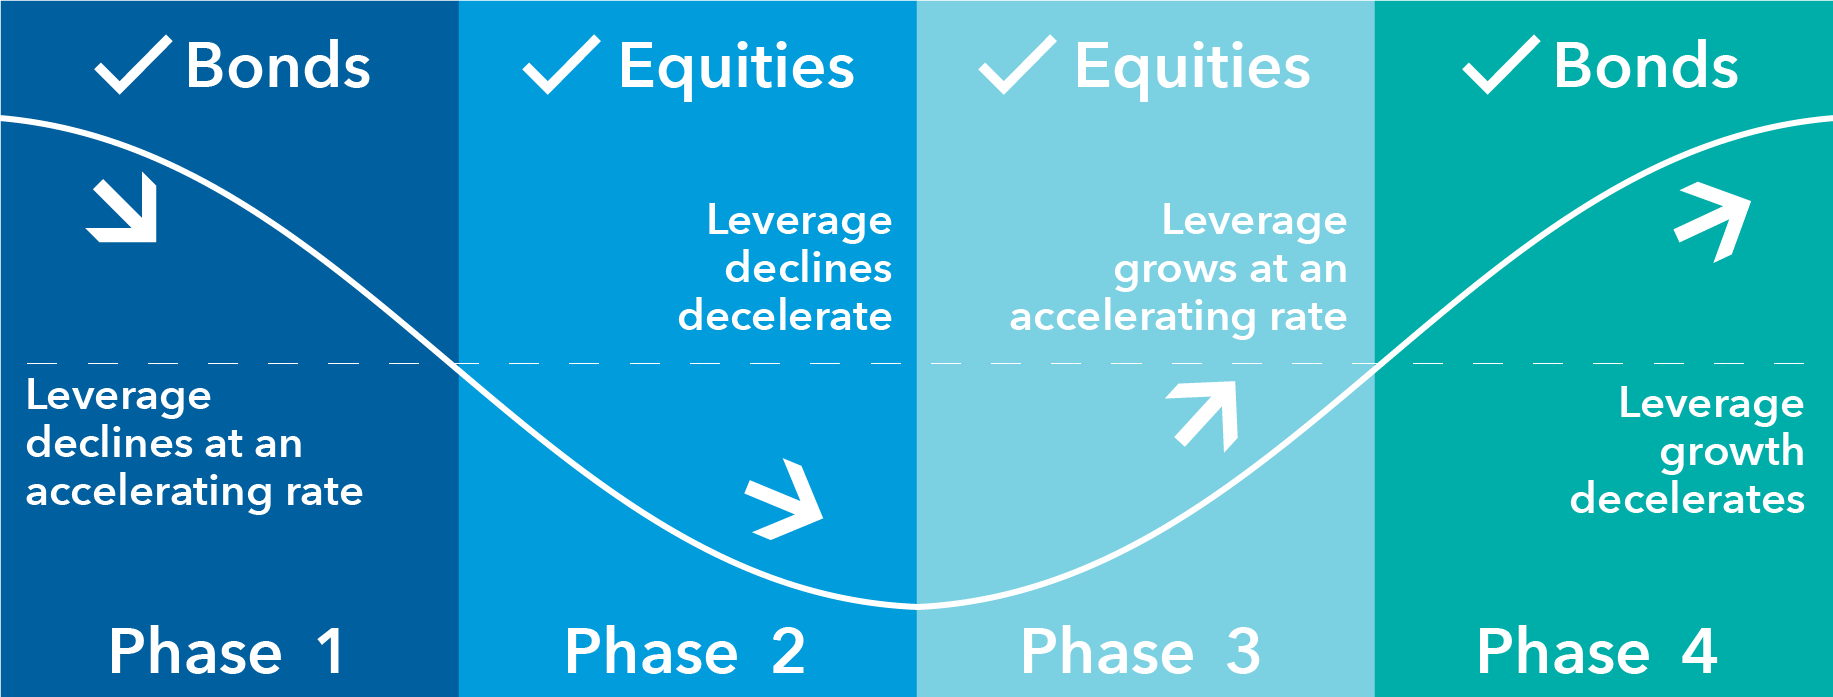 Chart shows the four phases of a financial cycle. Phase 1 of the cycle begins at a peak, but it moves lower as leverage in the economy declines at an accelerating rate. In phase 2, the cycle approaches a trough as leverage declines decelerate. Phase 3 begins at the trough, but it moves higher as leverage grows at an accelerating rate. In phase 4, the cycle approaches a peak as leverage growth decelerates. The chart indicates that bonds tend to fare better in phase 1 and phase 4, while equities tend to fare better in phase 2 and phase 3.